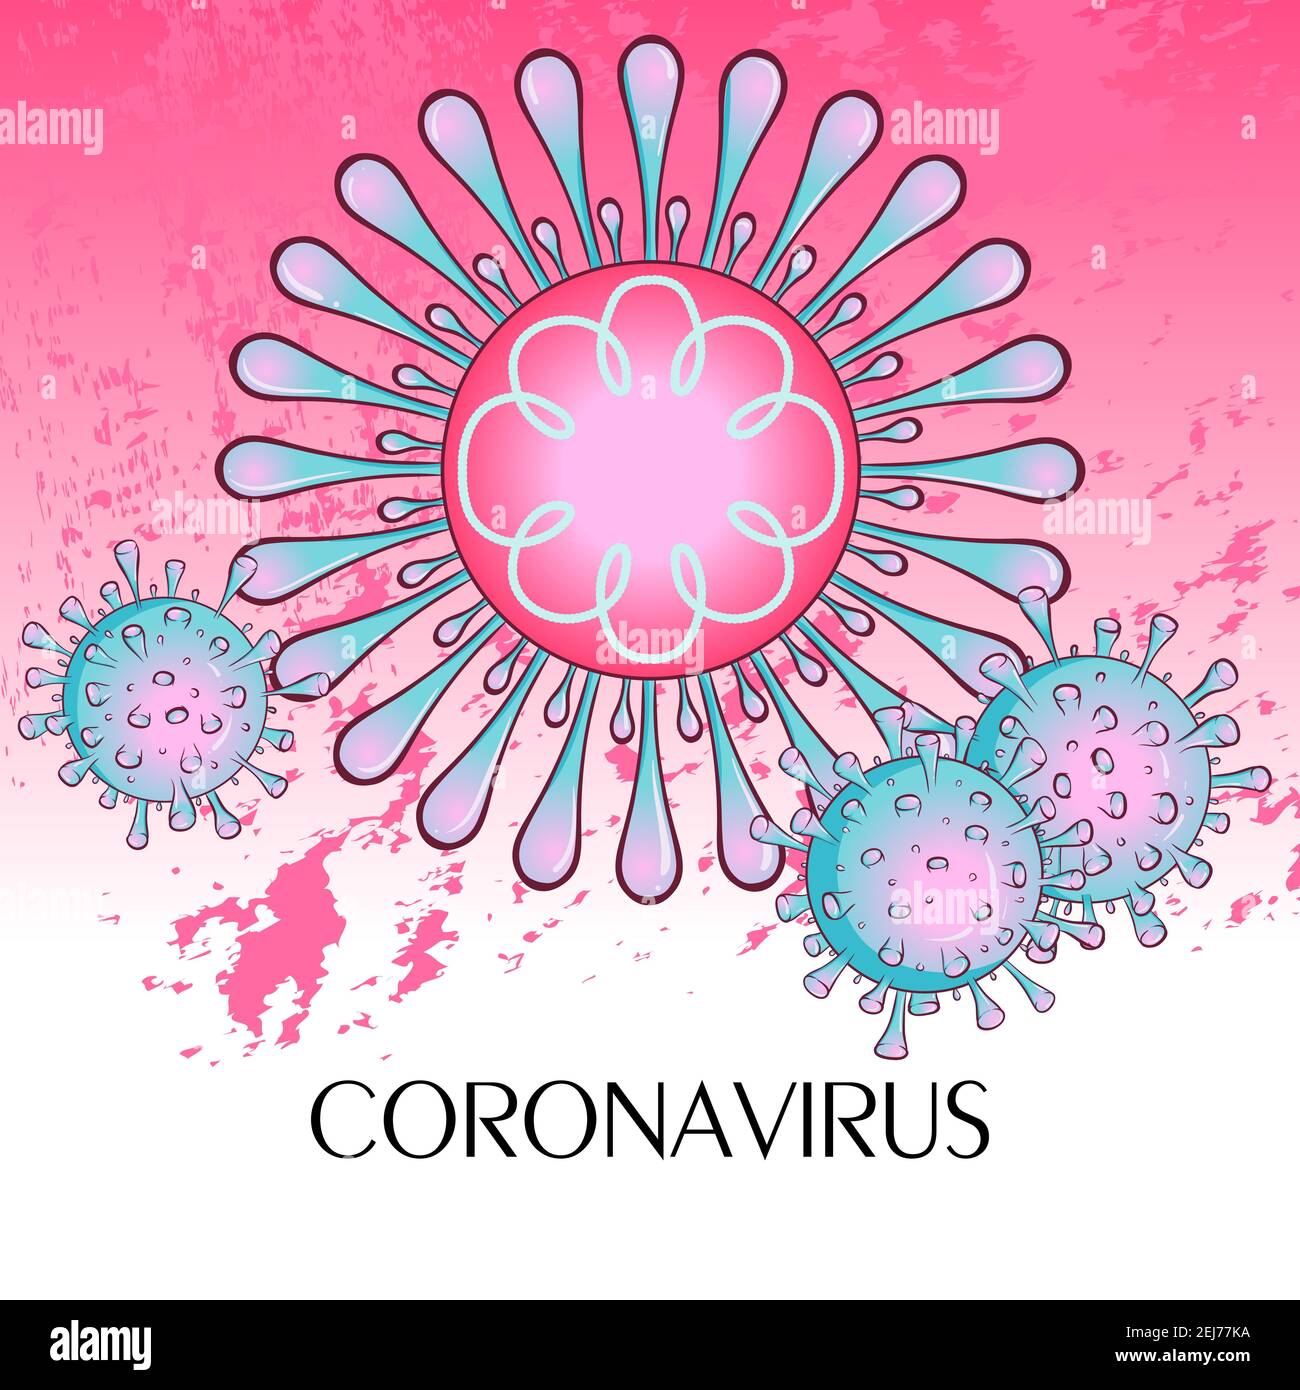 Pandemic medical concept with dangerous cells. Cut and whole virus cells. Vector illustration. Stop coronavirus. Danger and public health risk disease and flu outbreak. Stock Vector